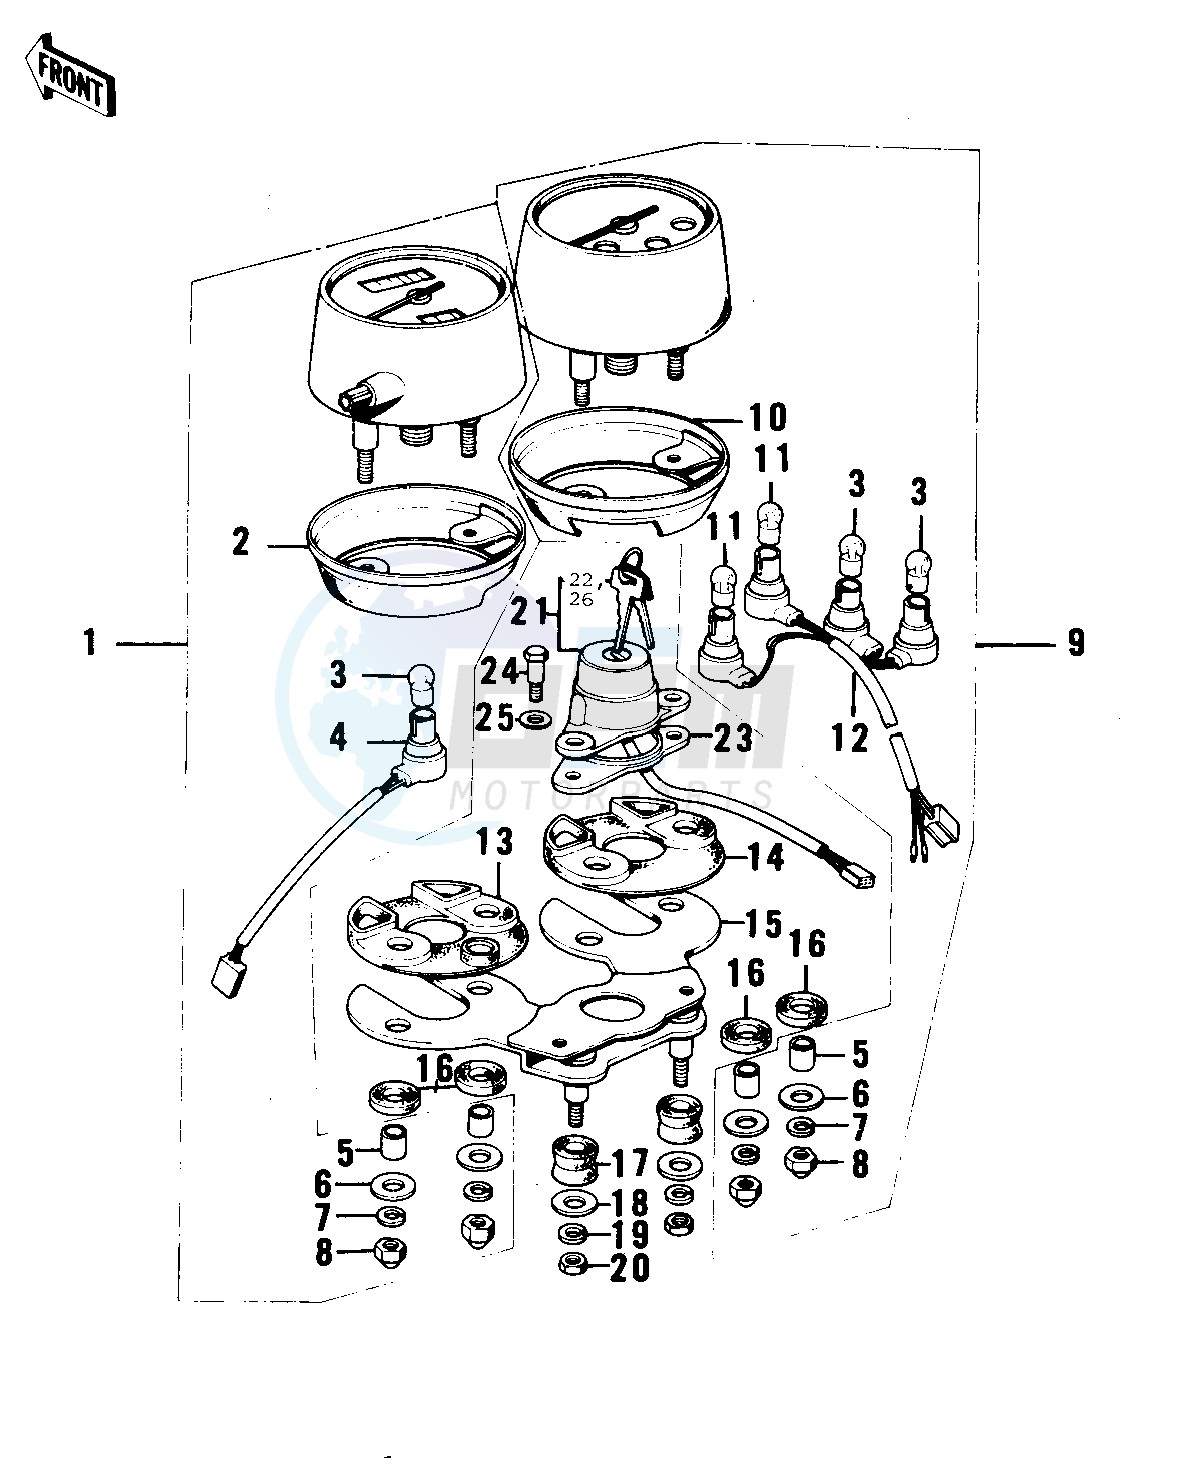 METERS_IGNITION SWITCH blueprint